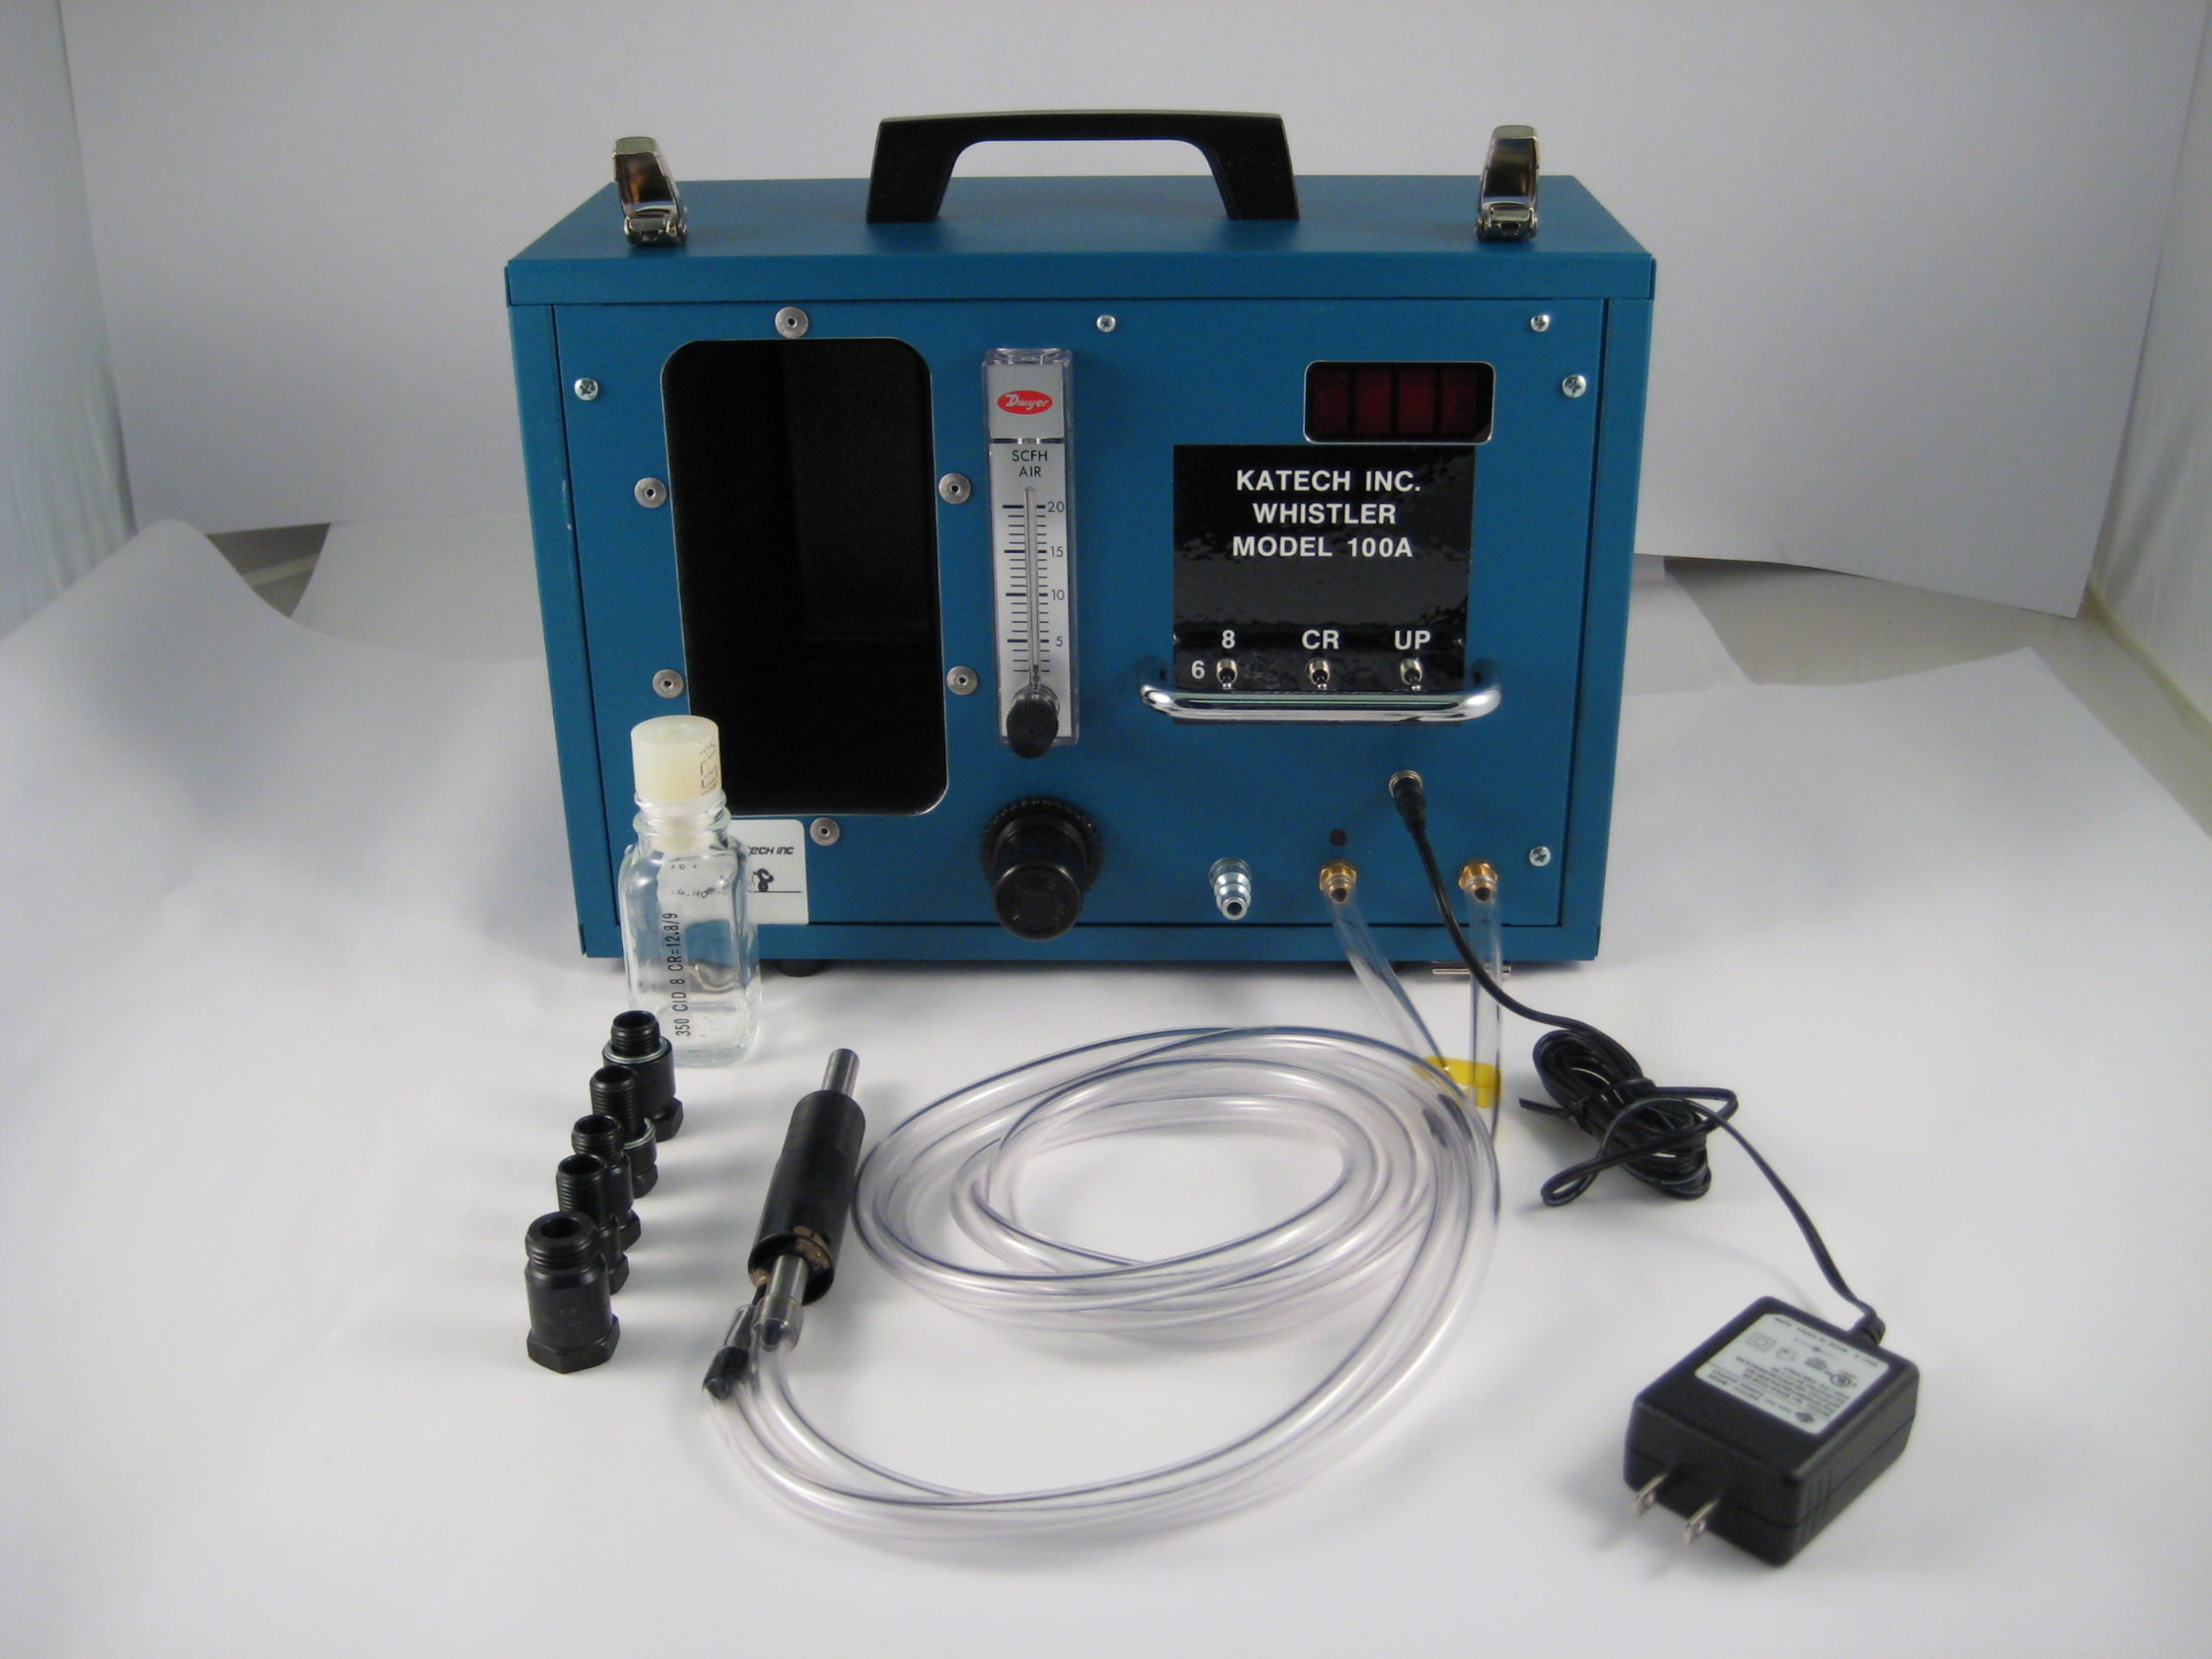 KAT-A0250-E Whistler Compression Ratio Tester Test the compression ratio of an